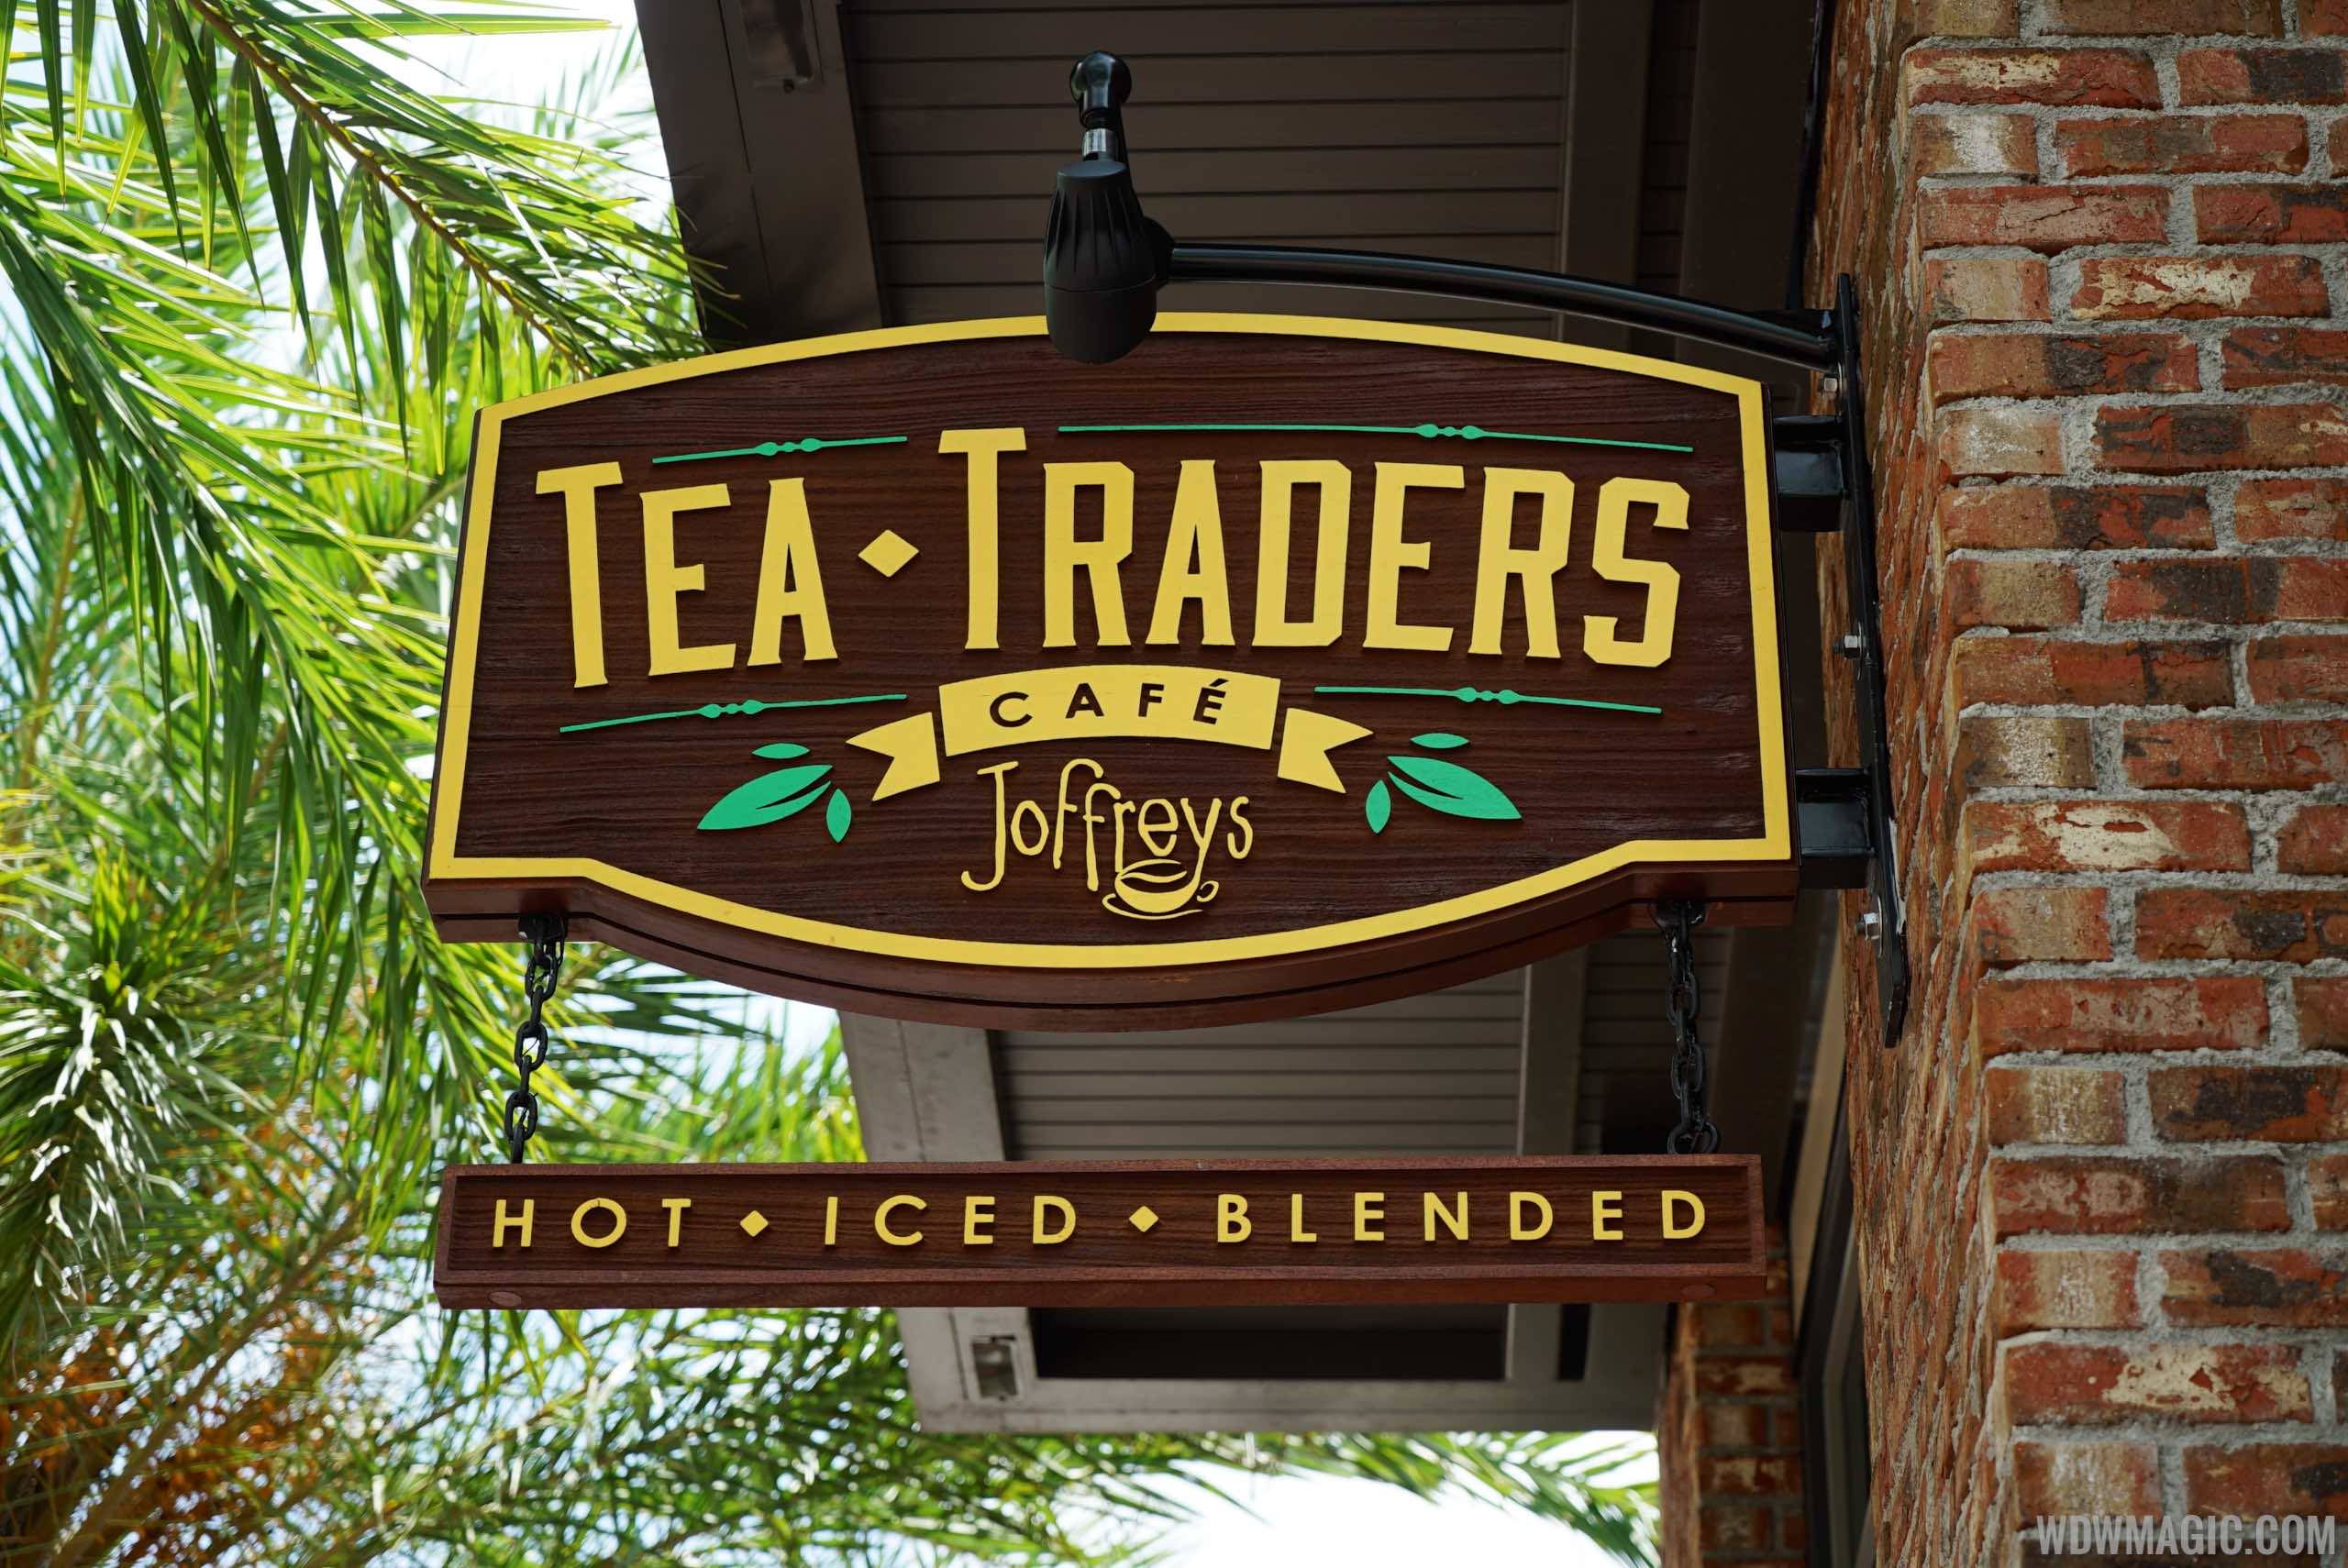 The Tea Traders Cafe